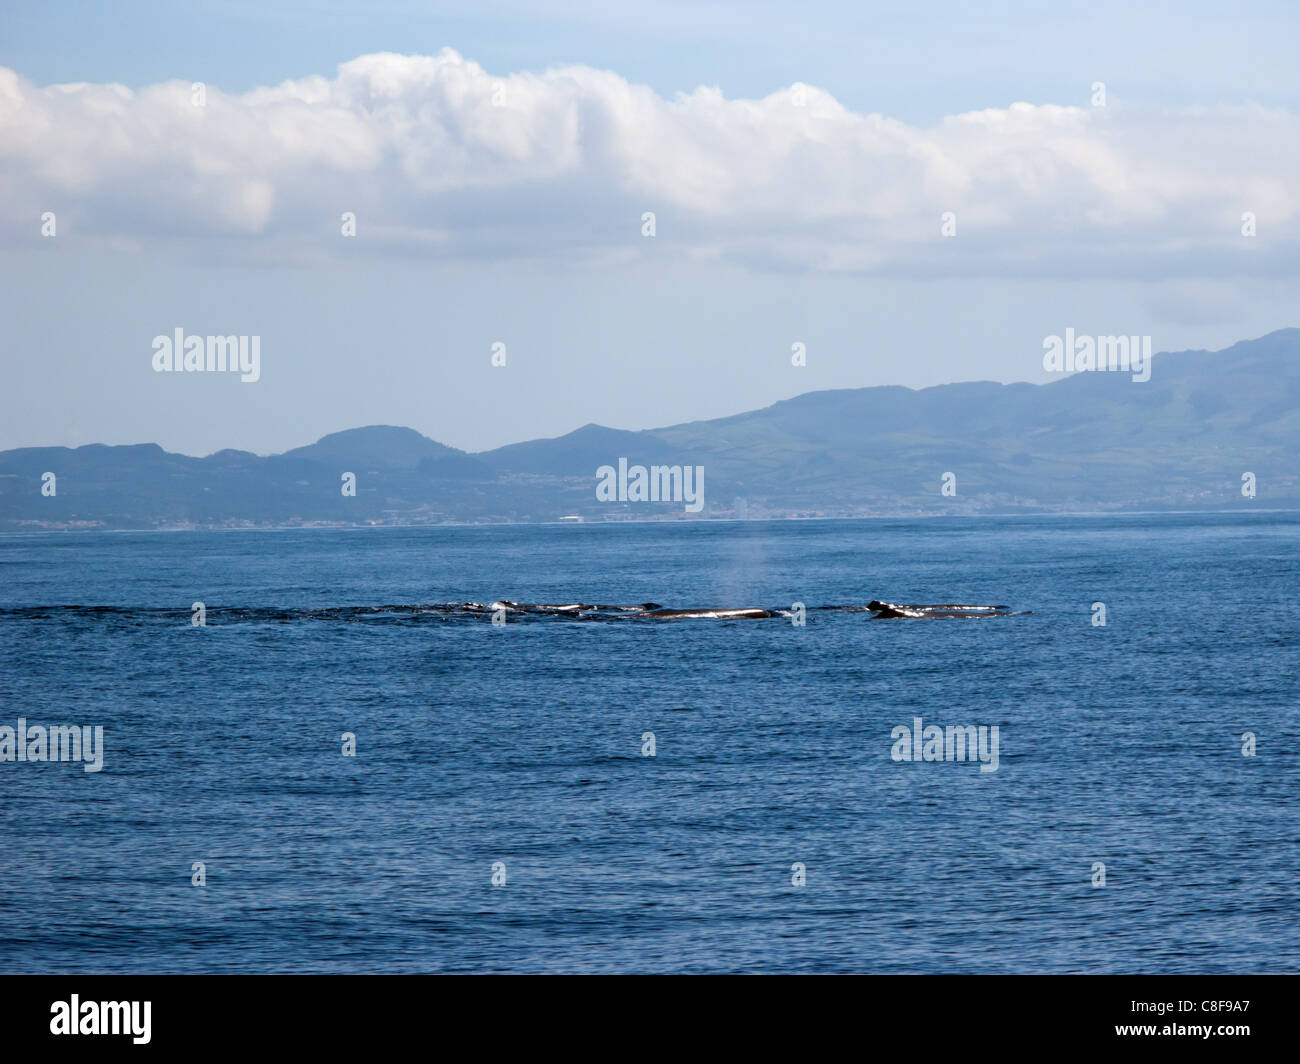 Sperm whales in the Atlantic ocean outside São Miguel island, the Azores. Stock Photo